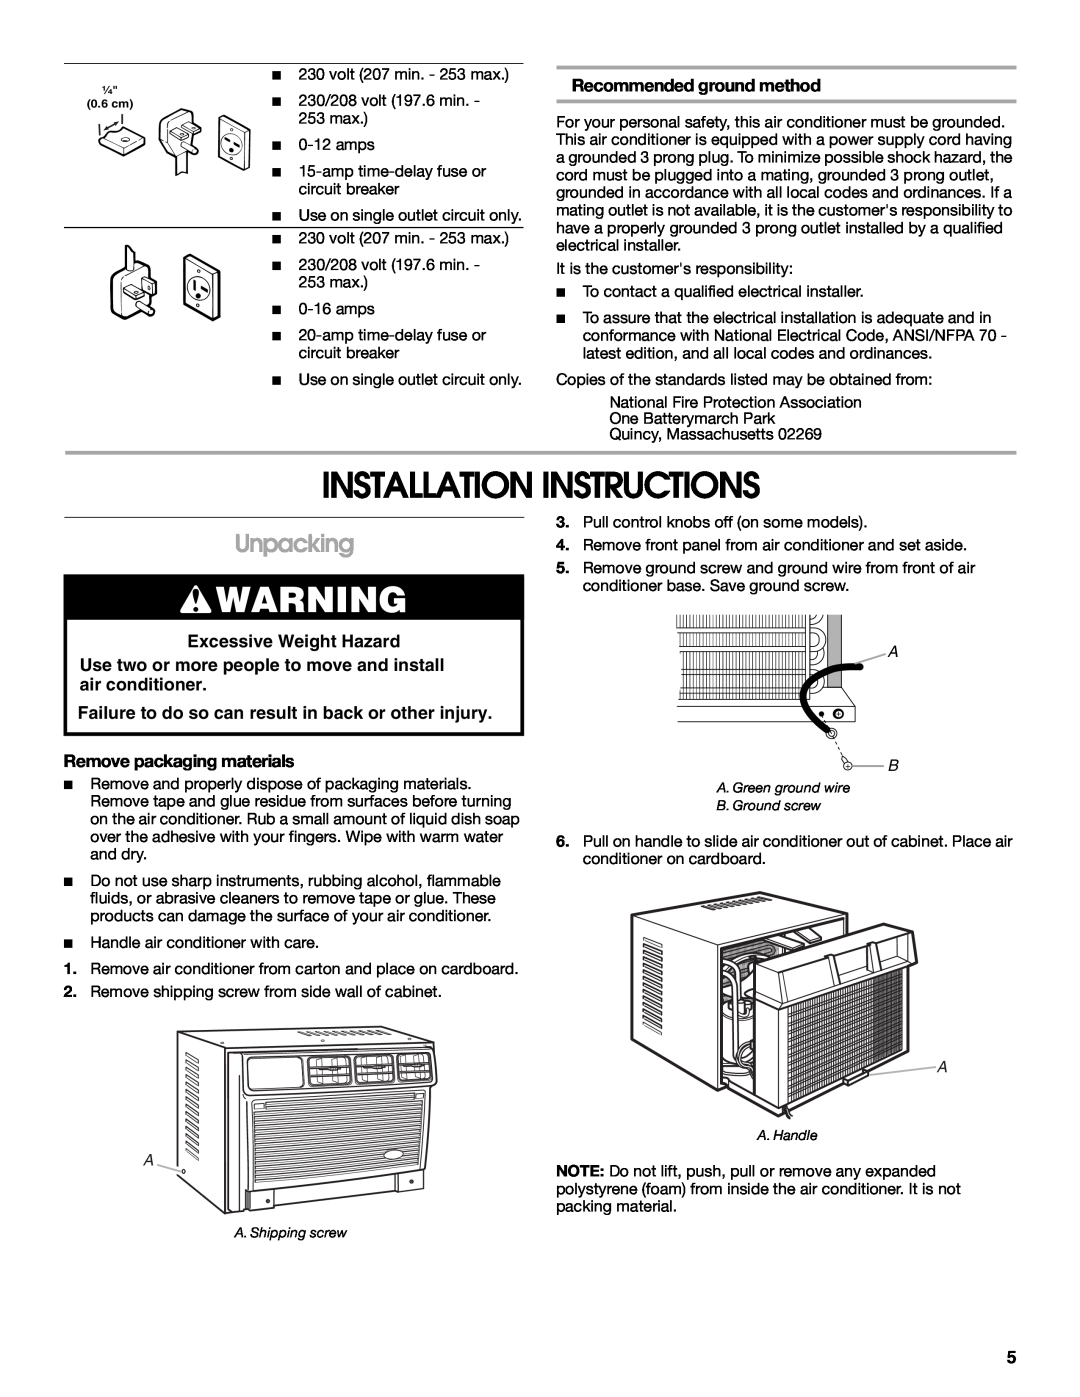 Whirlpool ACE082XP1 manual Installation Instructions, Unpacking, Recommended ground method, Excessive Weight Hazard 